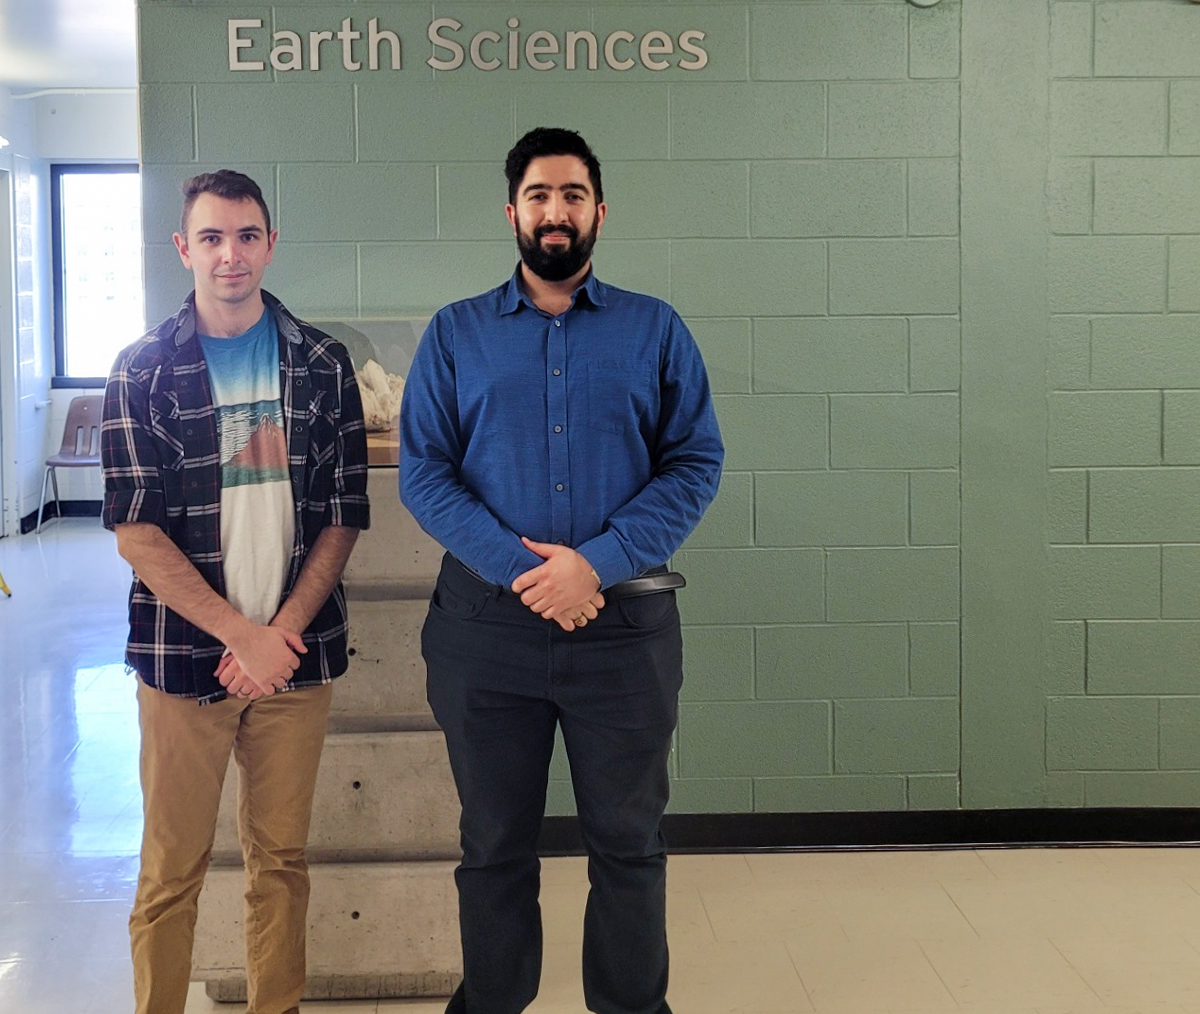 Two Brock University students pose in front of the Earth Sciences department sign. Pierre Simiganoschi stands to the left wearing plaid shirt with graphic t-shirt underneath and khaki pants. Nima Vaez-zadeh Asadi stands on the right wearing a blue dress shirt and dark dress pants.